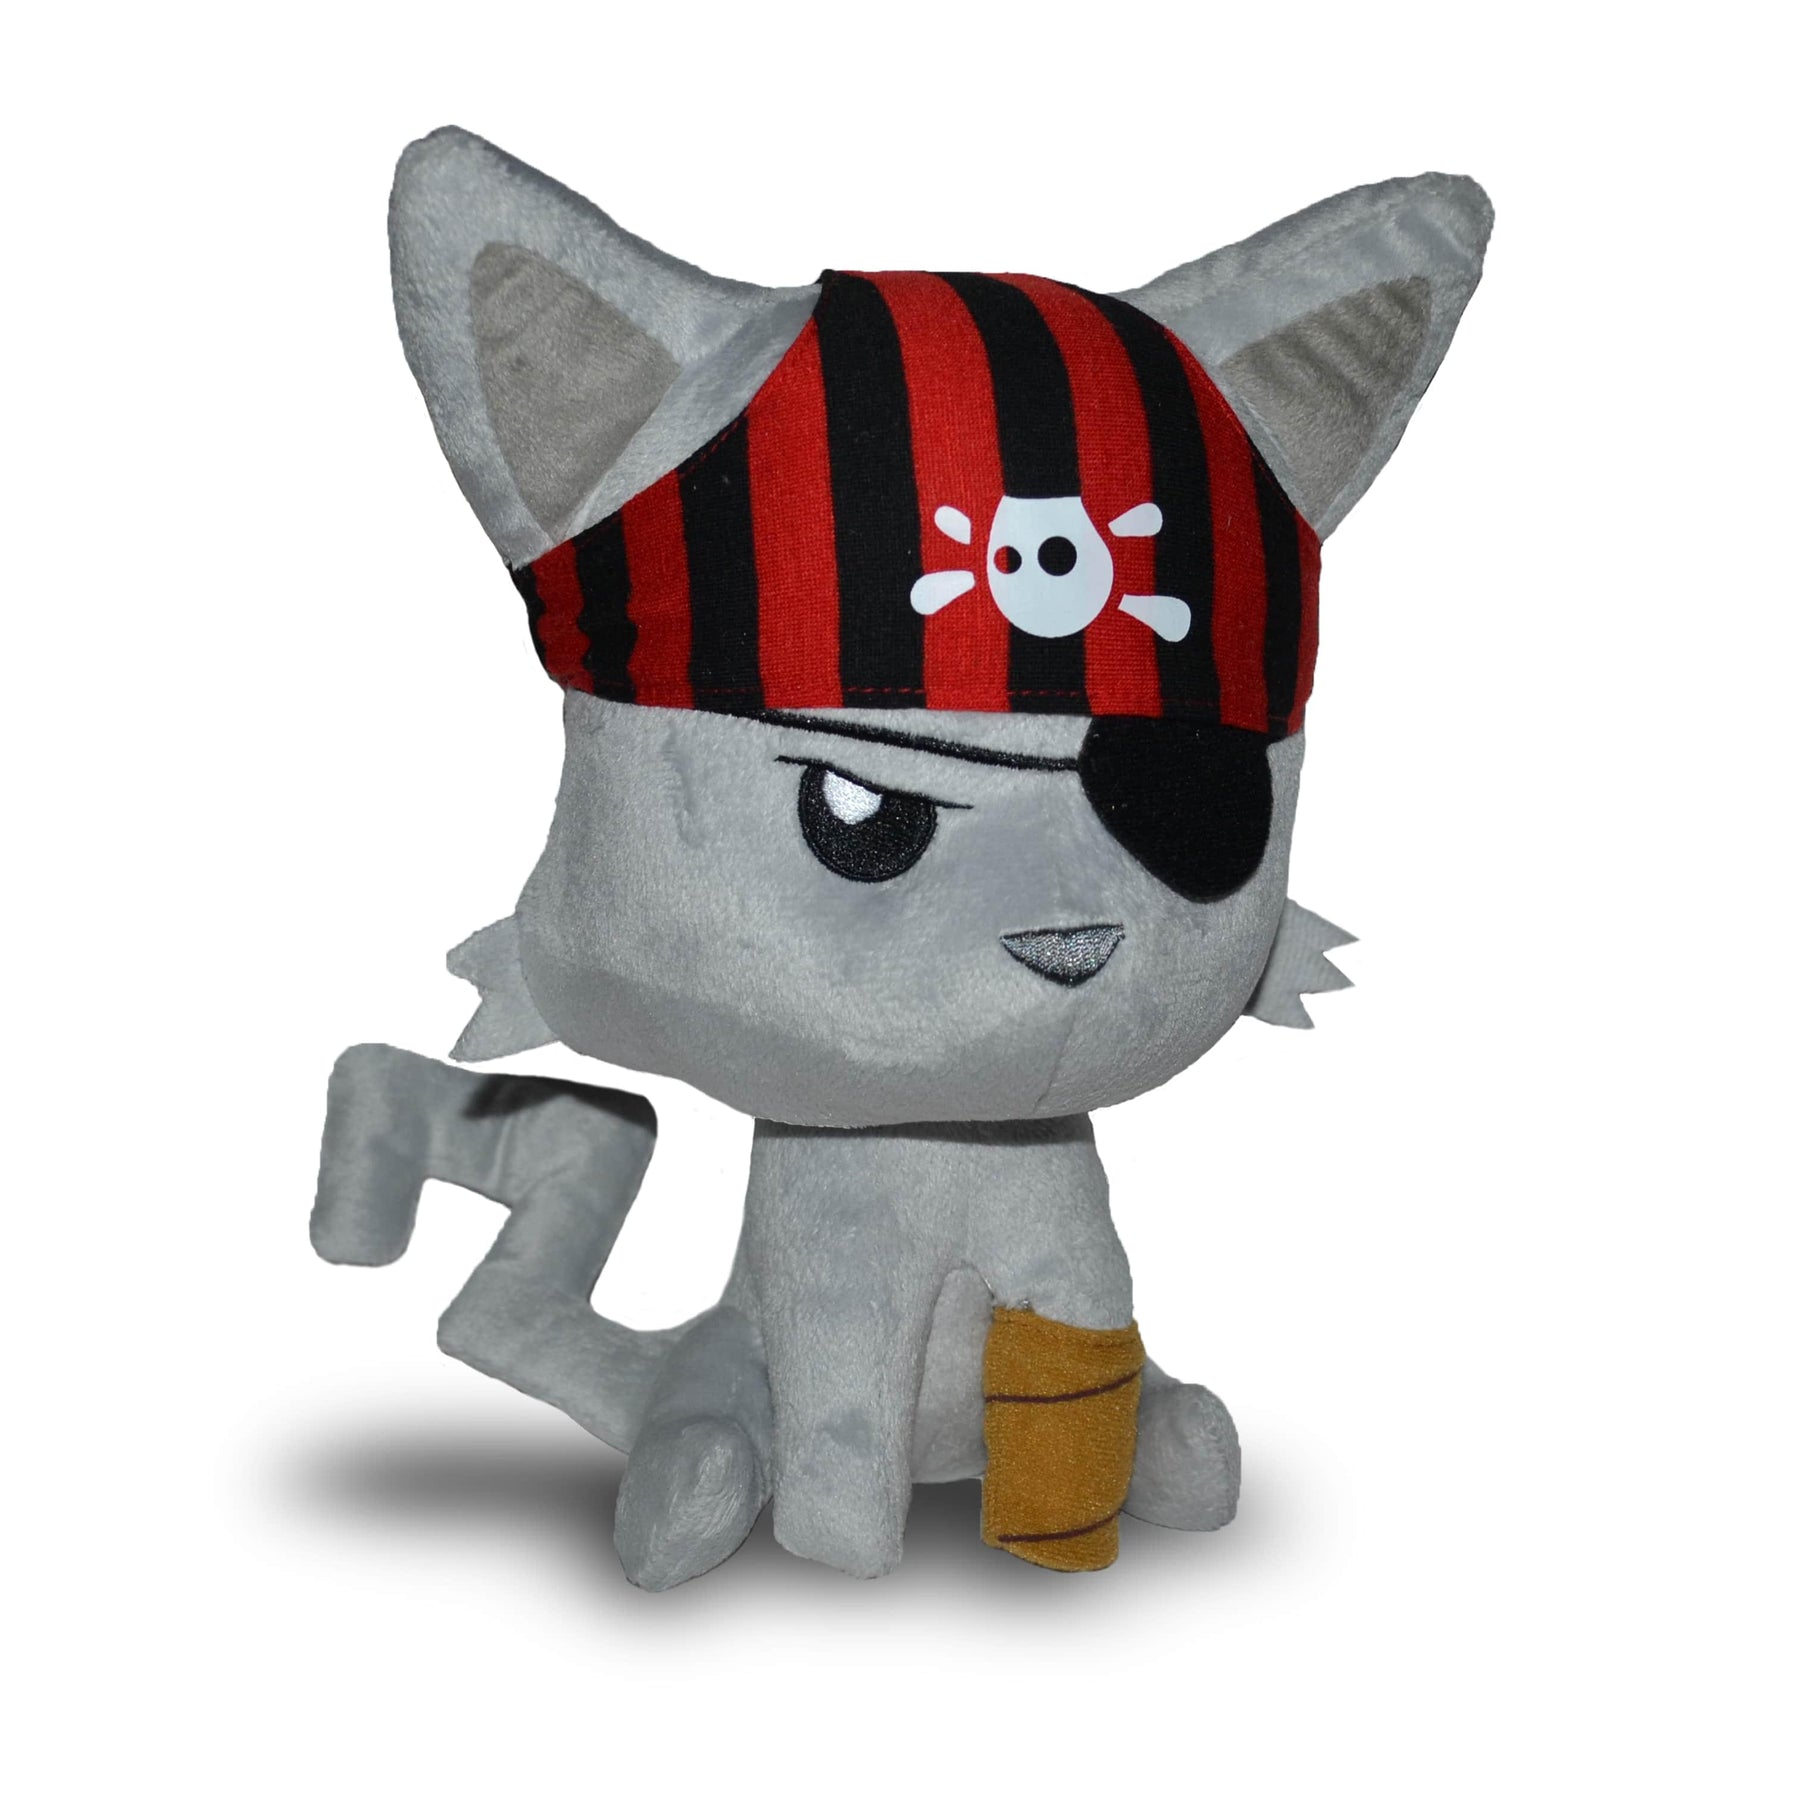 Tentacle Kitty 8 Inch Plush Animal | Bad Hat Day Pirate Kitty